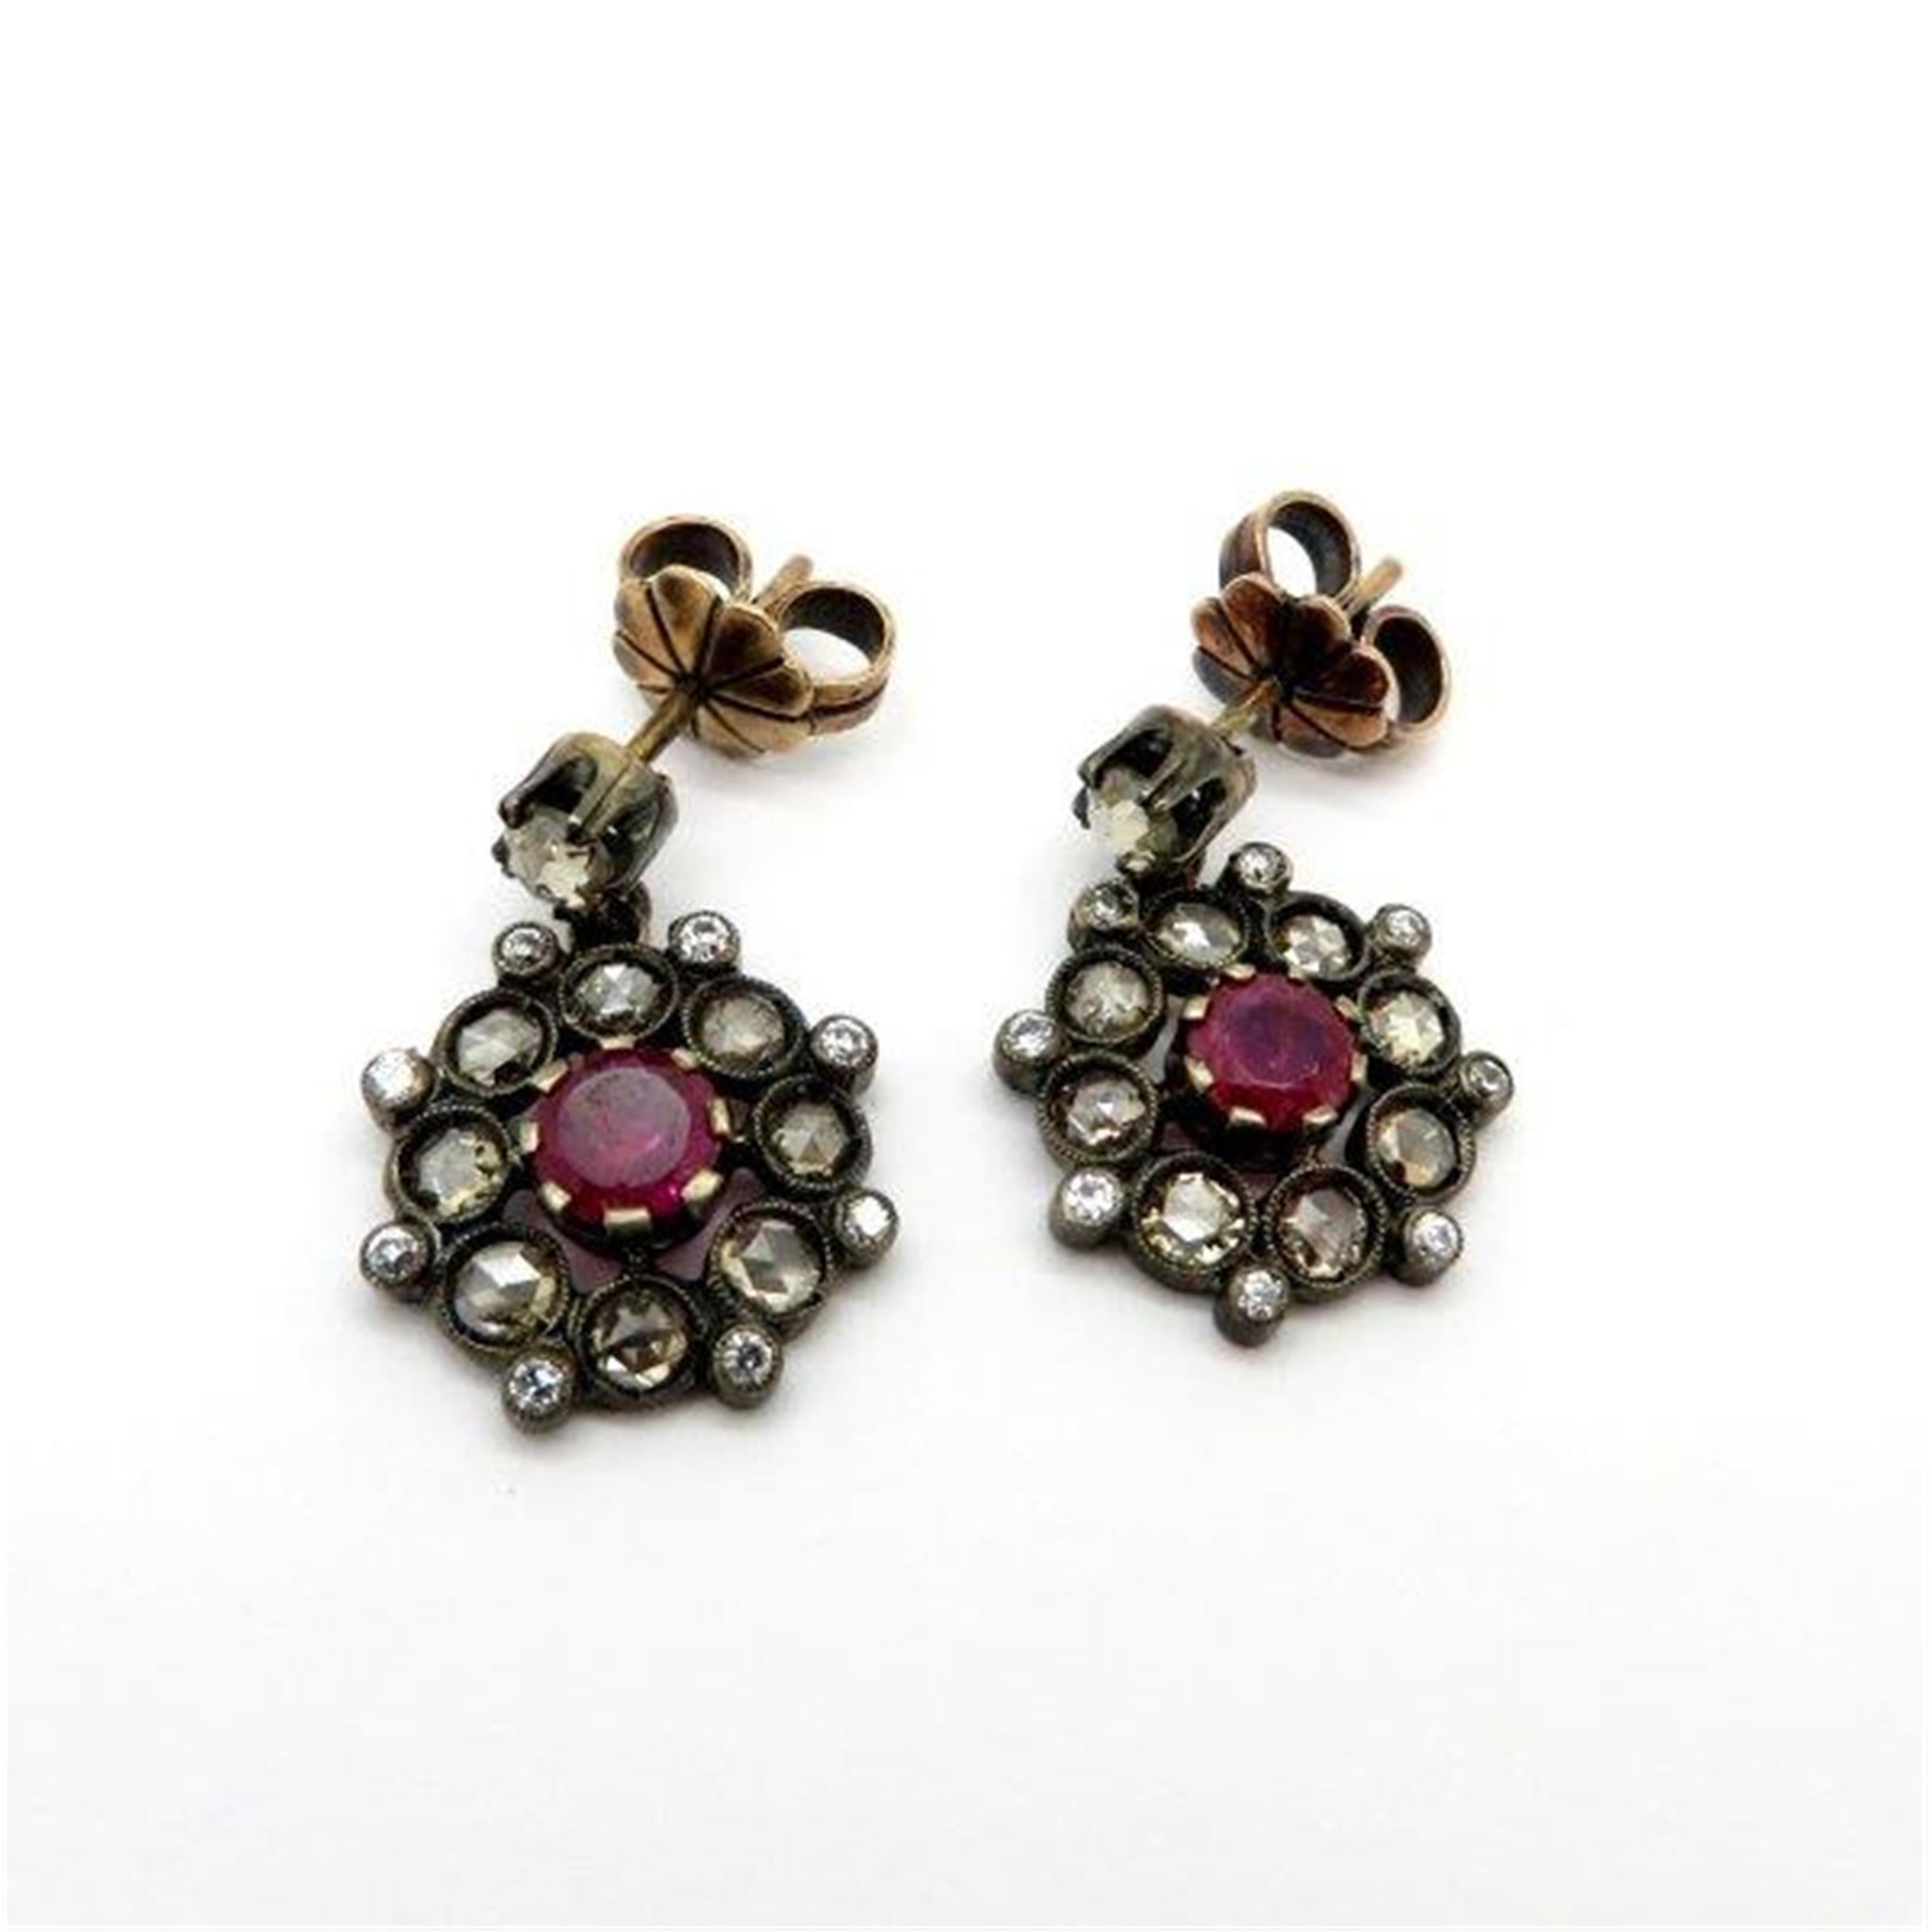 Estate Victorian style ruby and rose cut diamond dangle flower earrings. The earrings are crafted out of platinum and 18K yellow gold. Featuring two round brilliant cut fine quality rubies, prong set, weighing approximately 1.00 carat total.